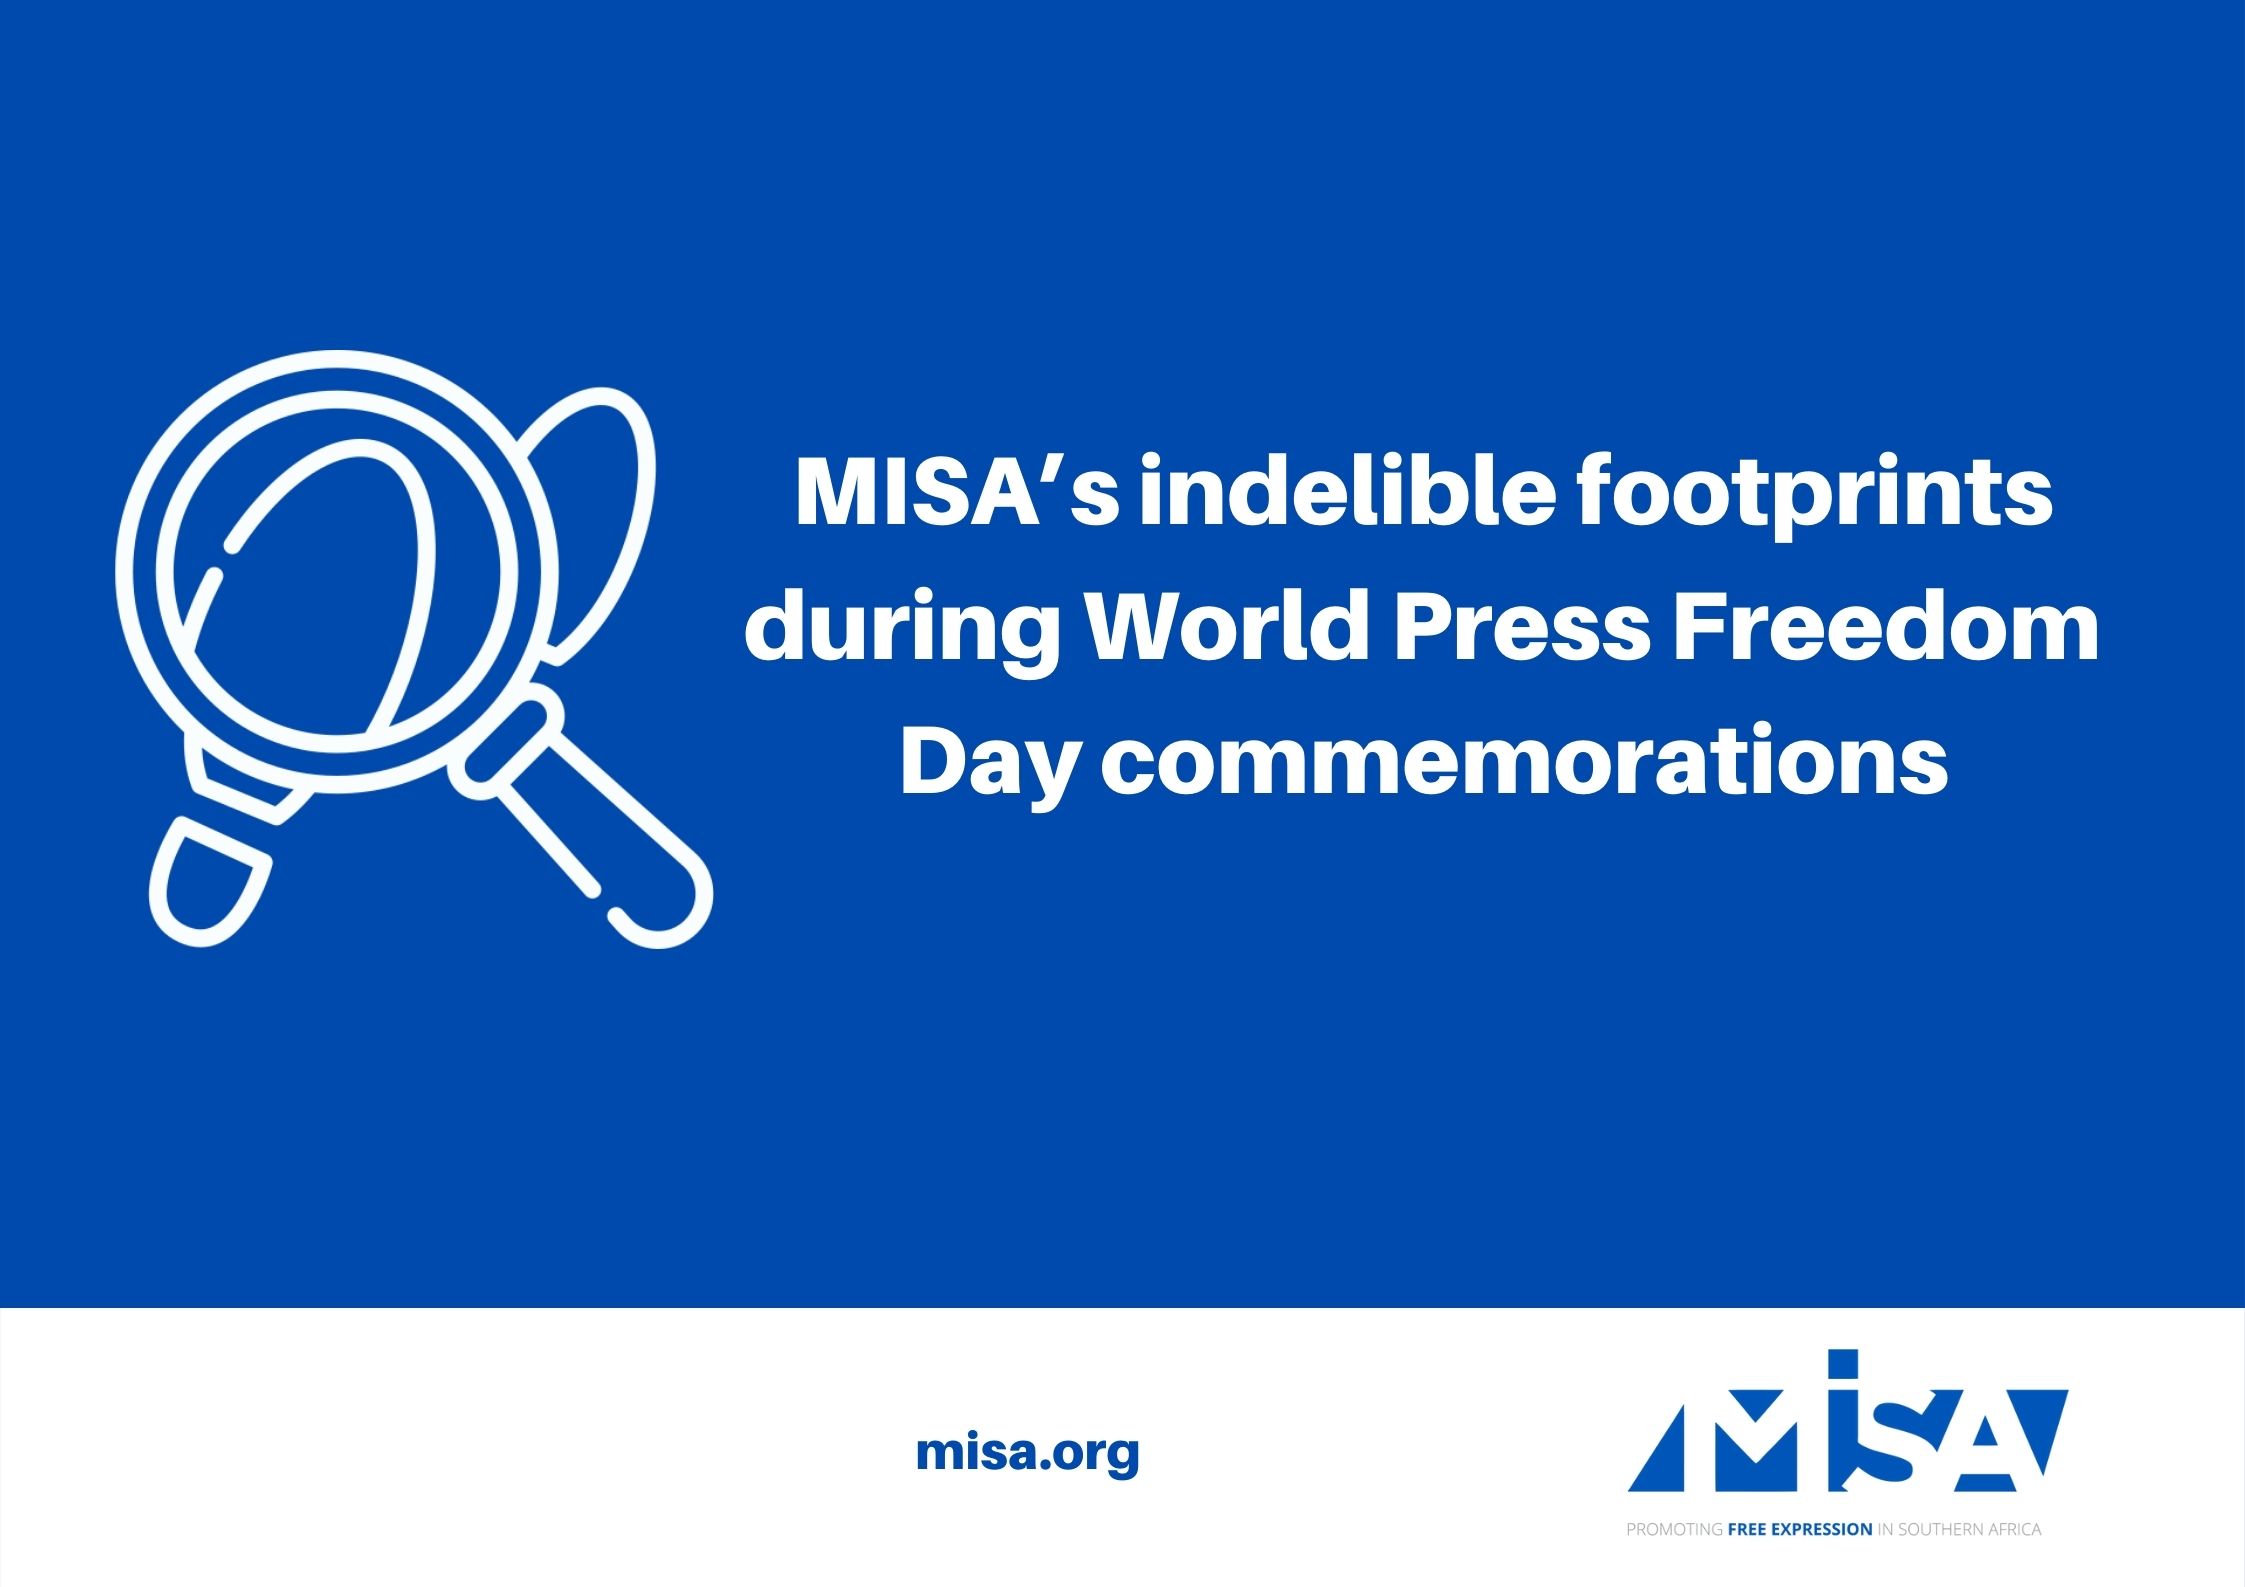 MISA’s indelible footprints during World Press Freedom Day commemorations